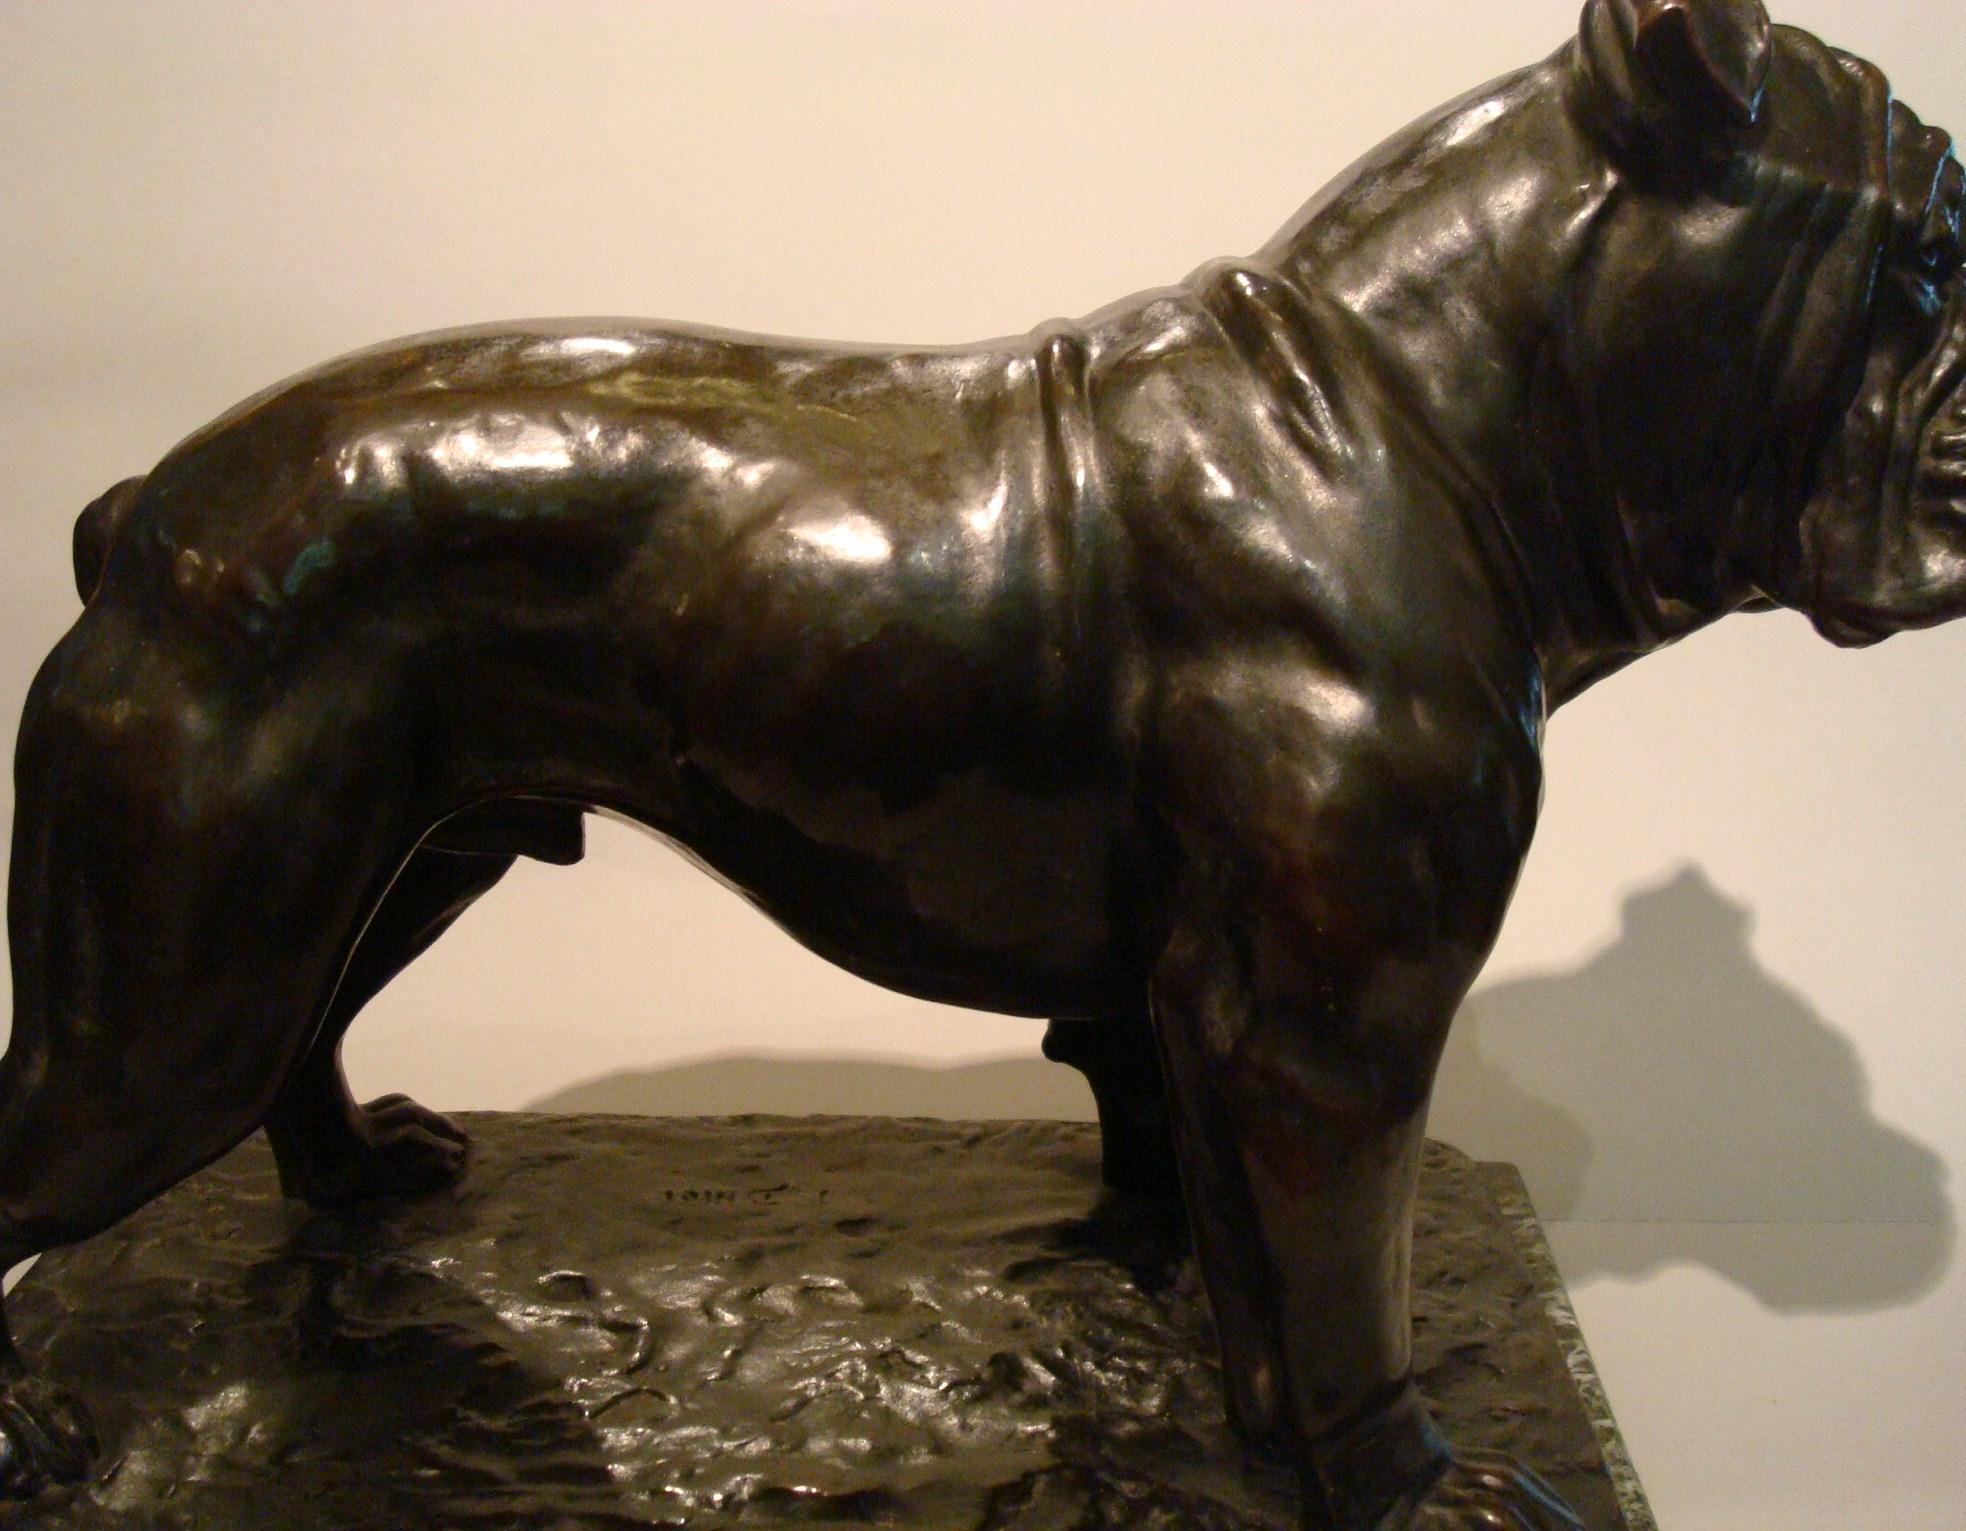 Fantastic giant English bulldog bronze sculpture. Made by German artist Fritz Diller, circa 1910. Mounted over a green marble base.
Perfect details! The dog looks alive.